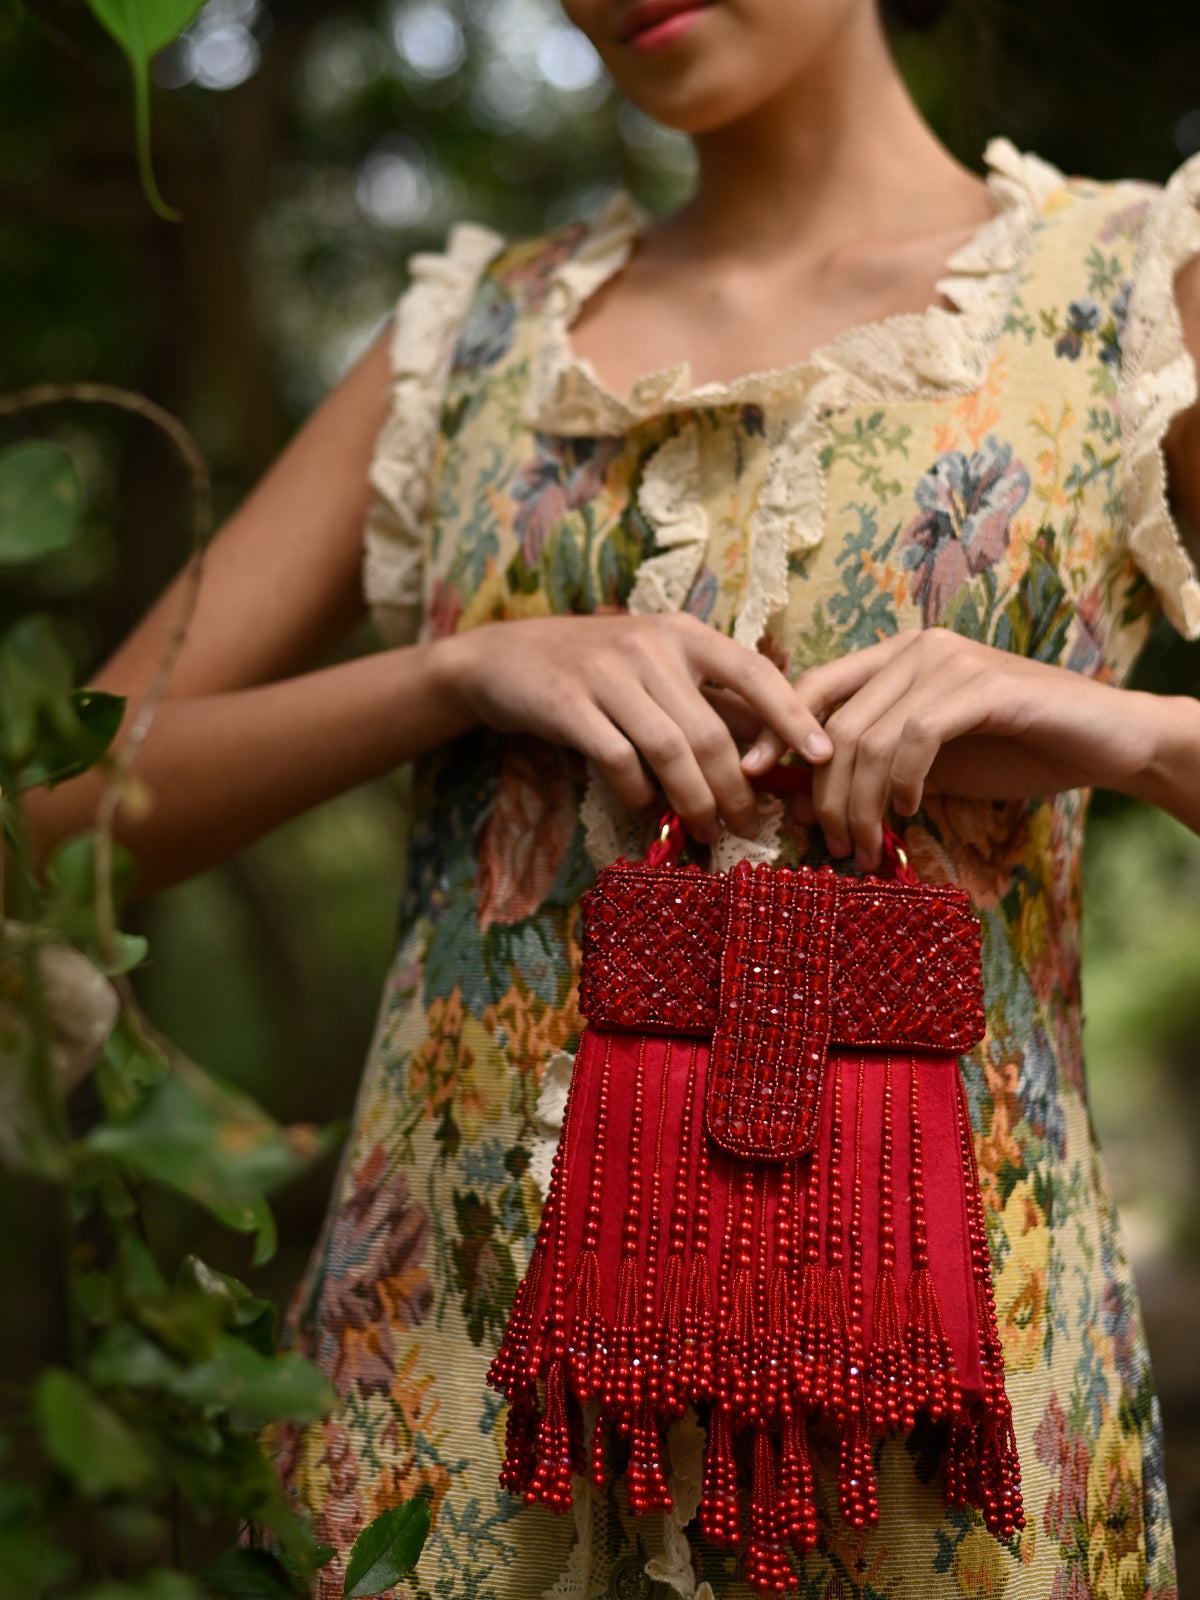 Red Beaded Clutch Bag With Tassels